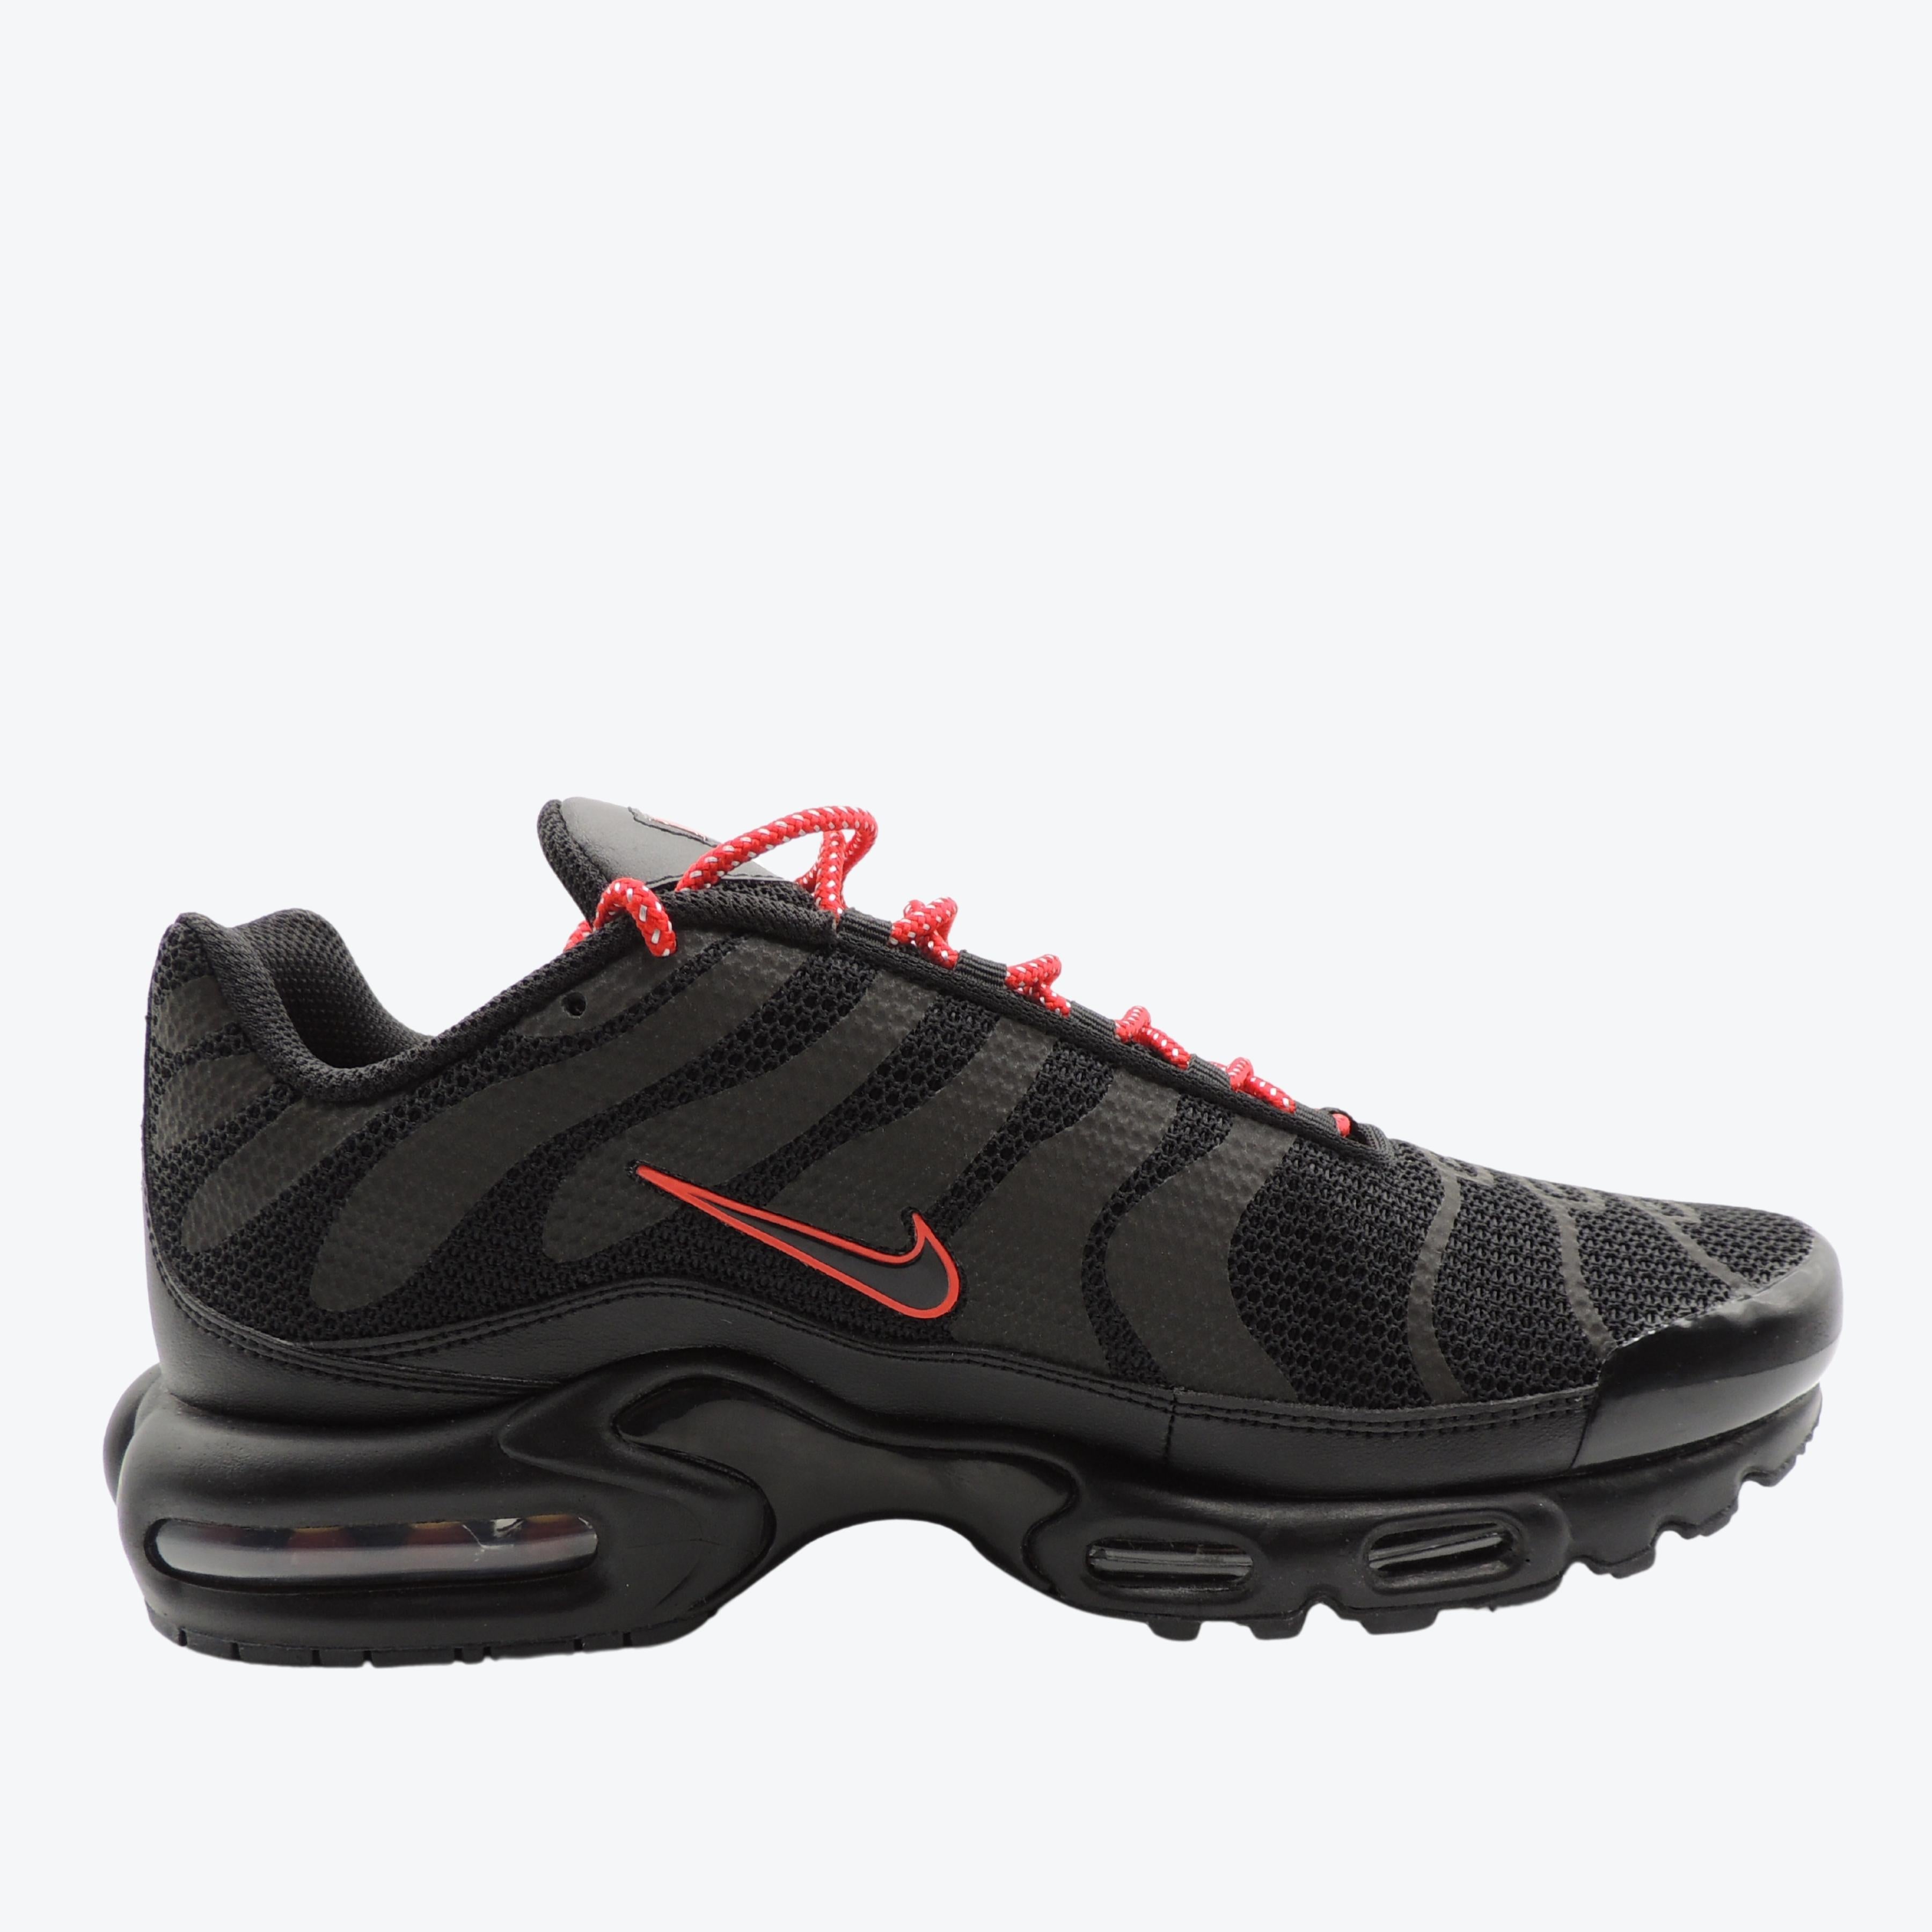 Nike Air Max Plus in Black/Red Reflective  UK 9